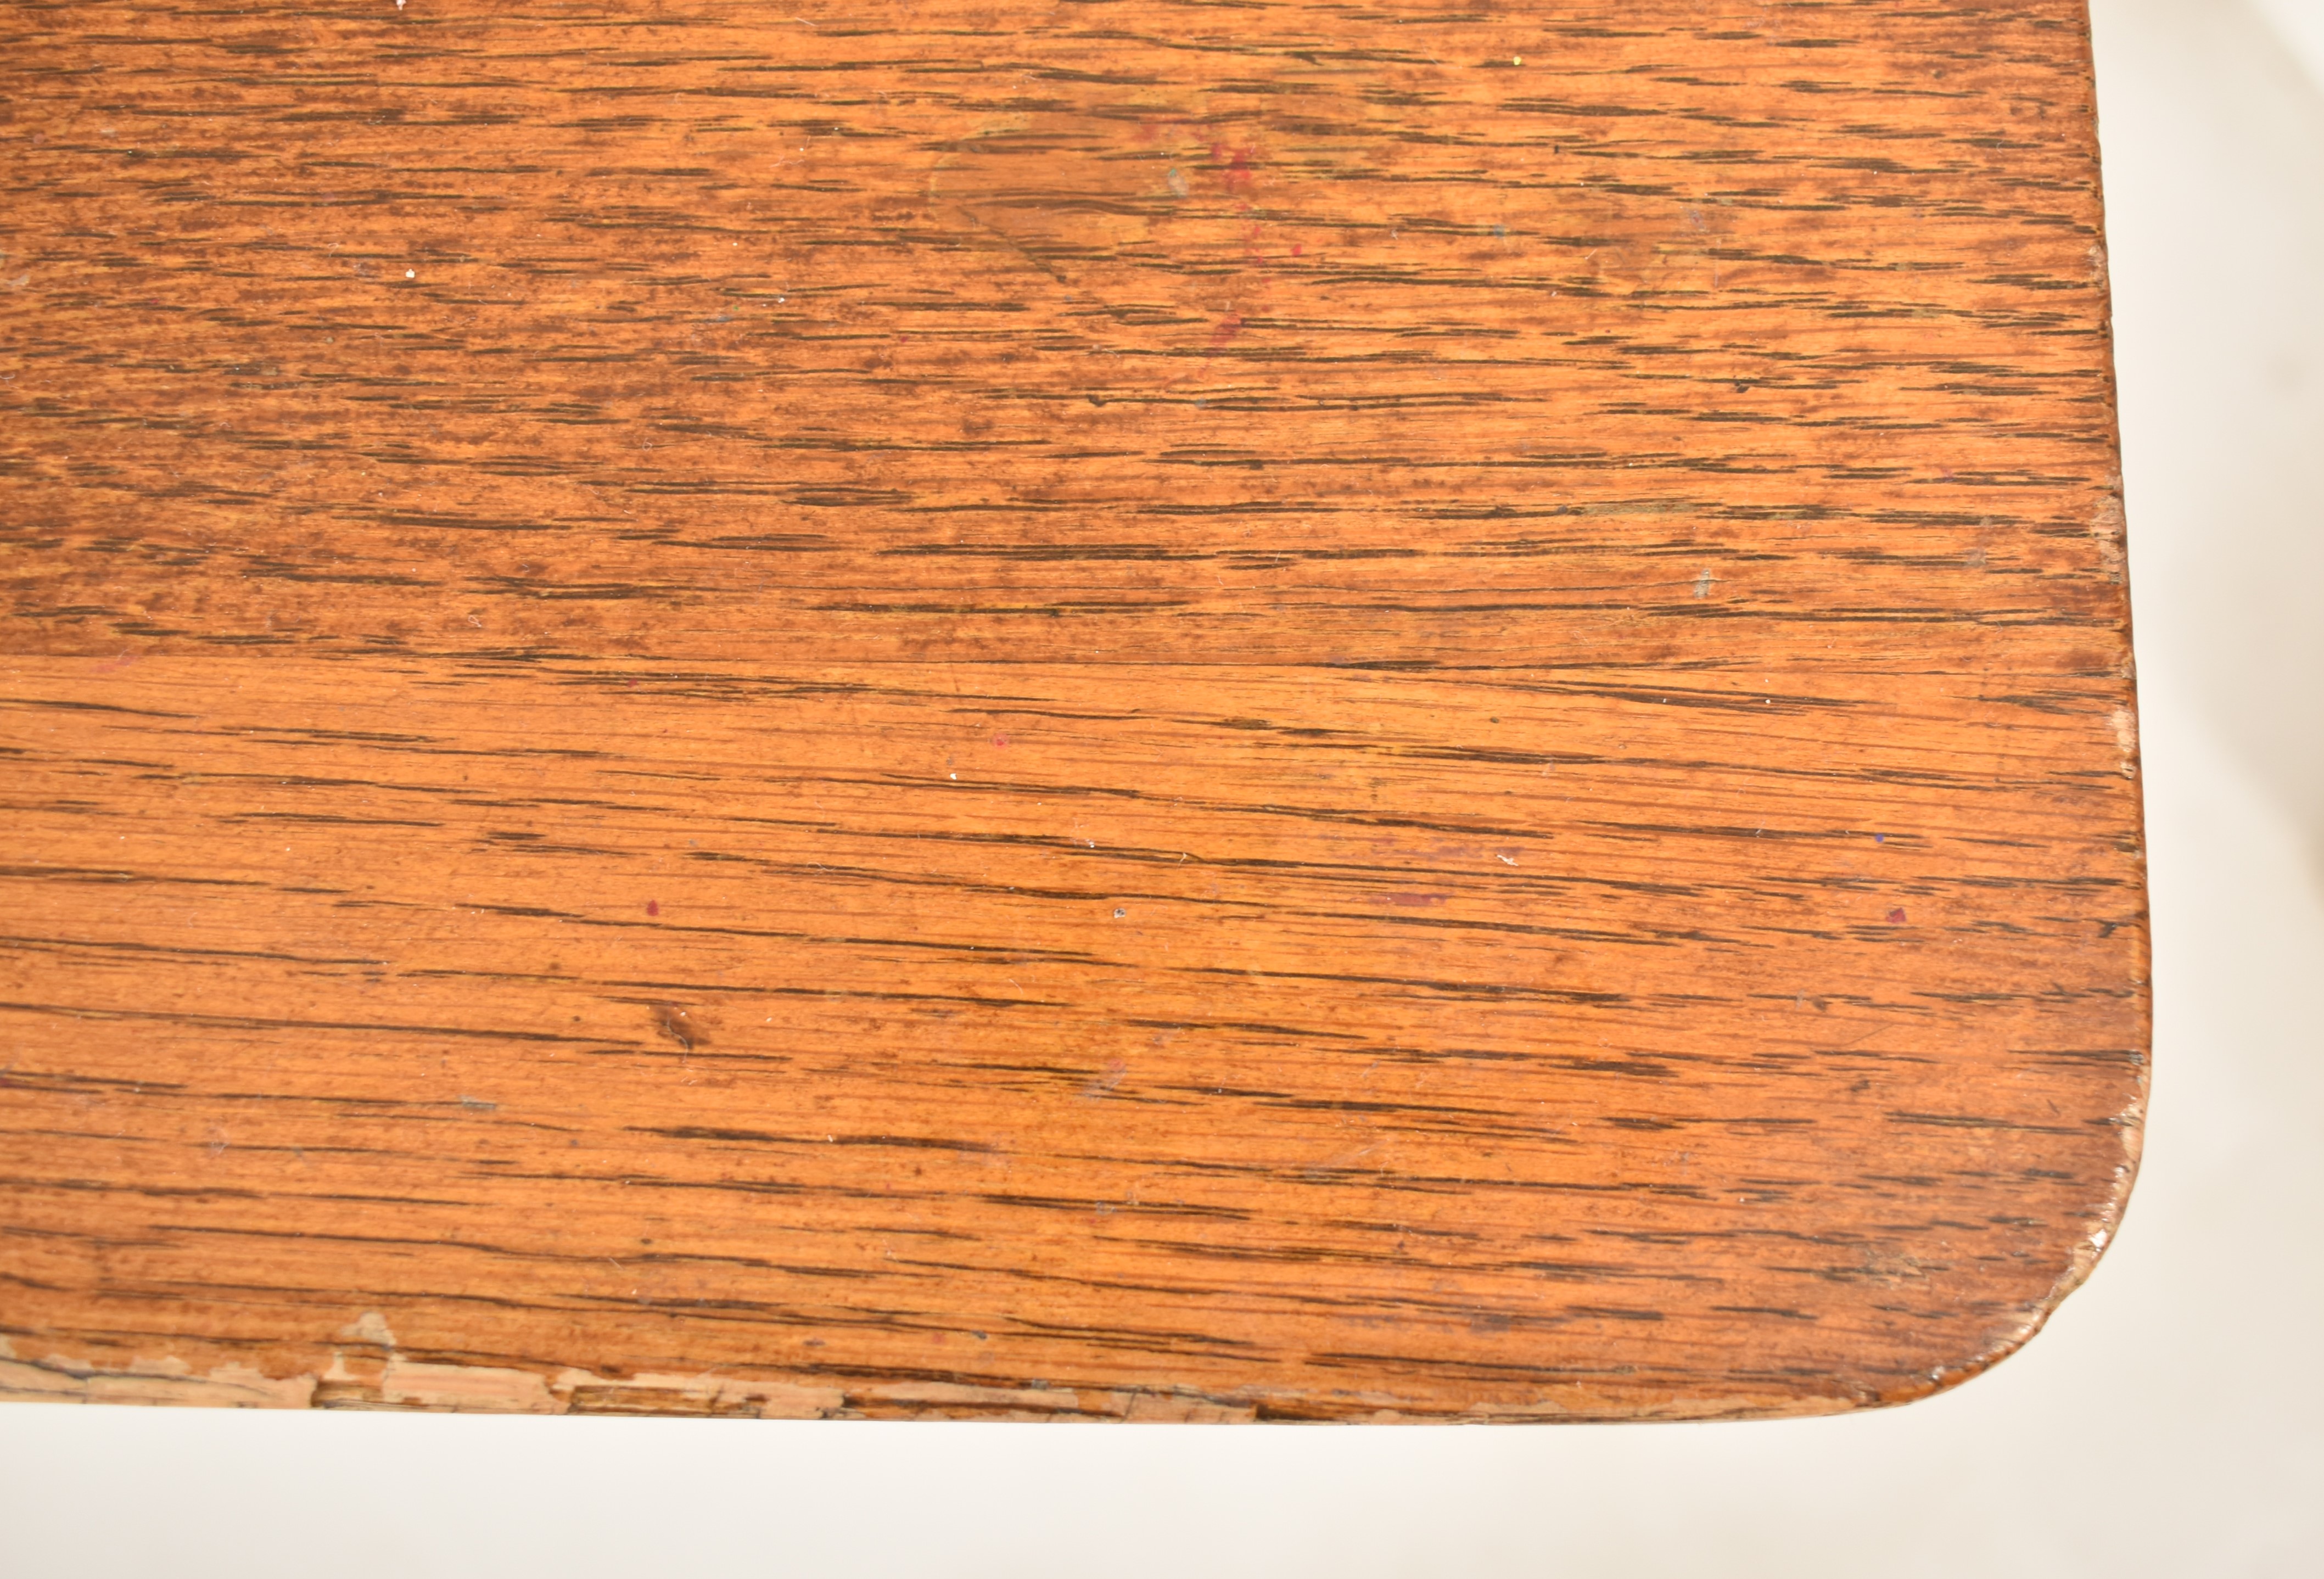 EARLY 20TH CENTURY ELM WOOD PLANK TOP REFECTORY TABLE - Image 2 of 6